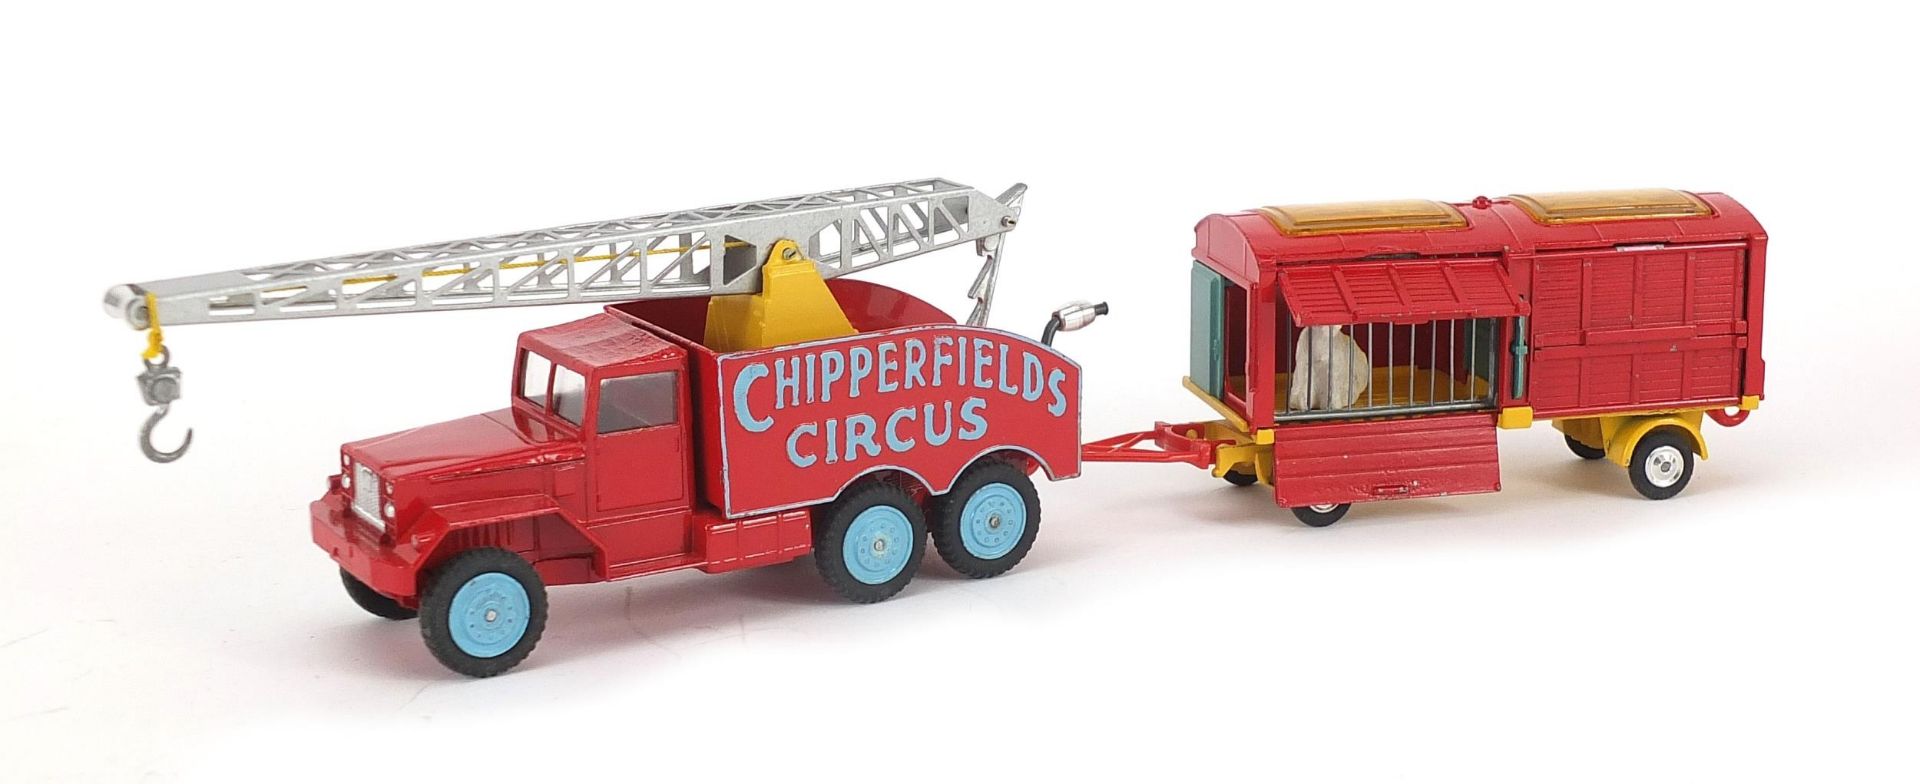 Corgi Toys Major Chipperfield's Circus crane, truck and cage with box, gift set no 12 - Image 2 of 5